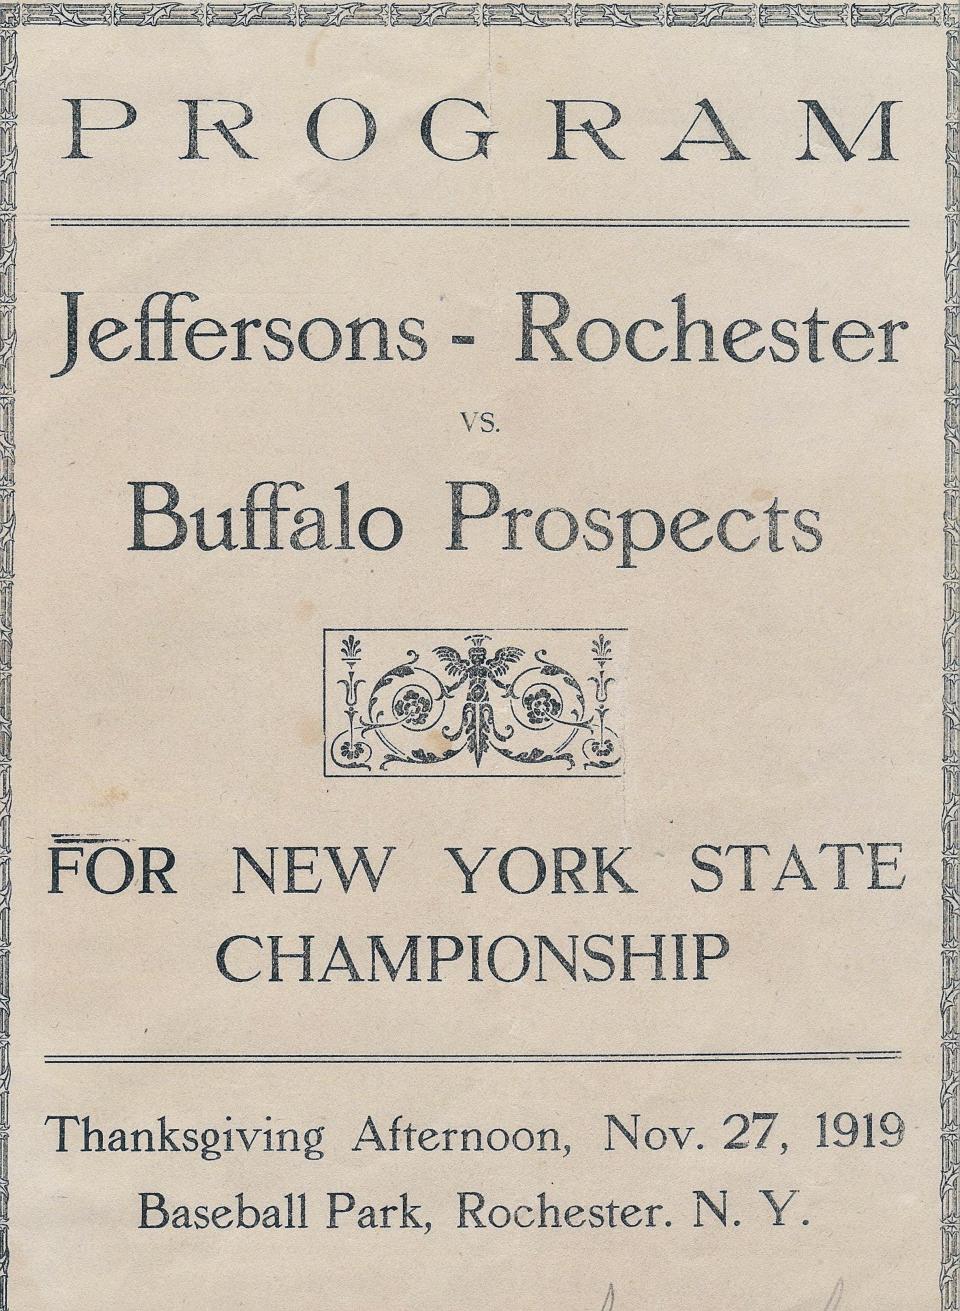 An image of the 1919 New York State Championship game program. The Rochester Jeffersons hosted the Buffalo Prospects in a game played in a snowstorm in front of some 4,000 fans. It ended in a 0-0 tie. This game occurred one year before the Jeffersons joined the NFL.